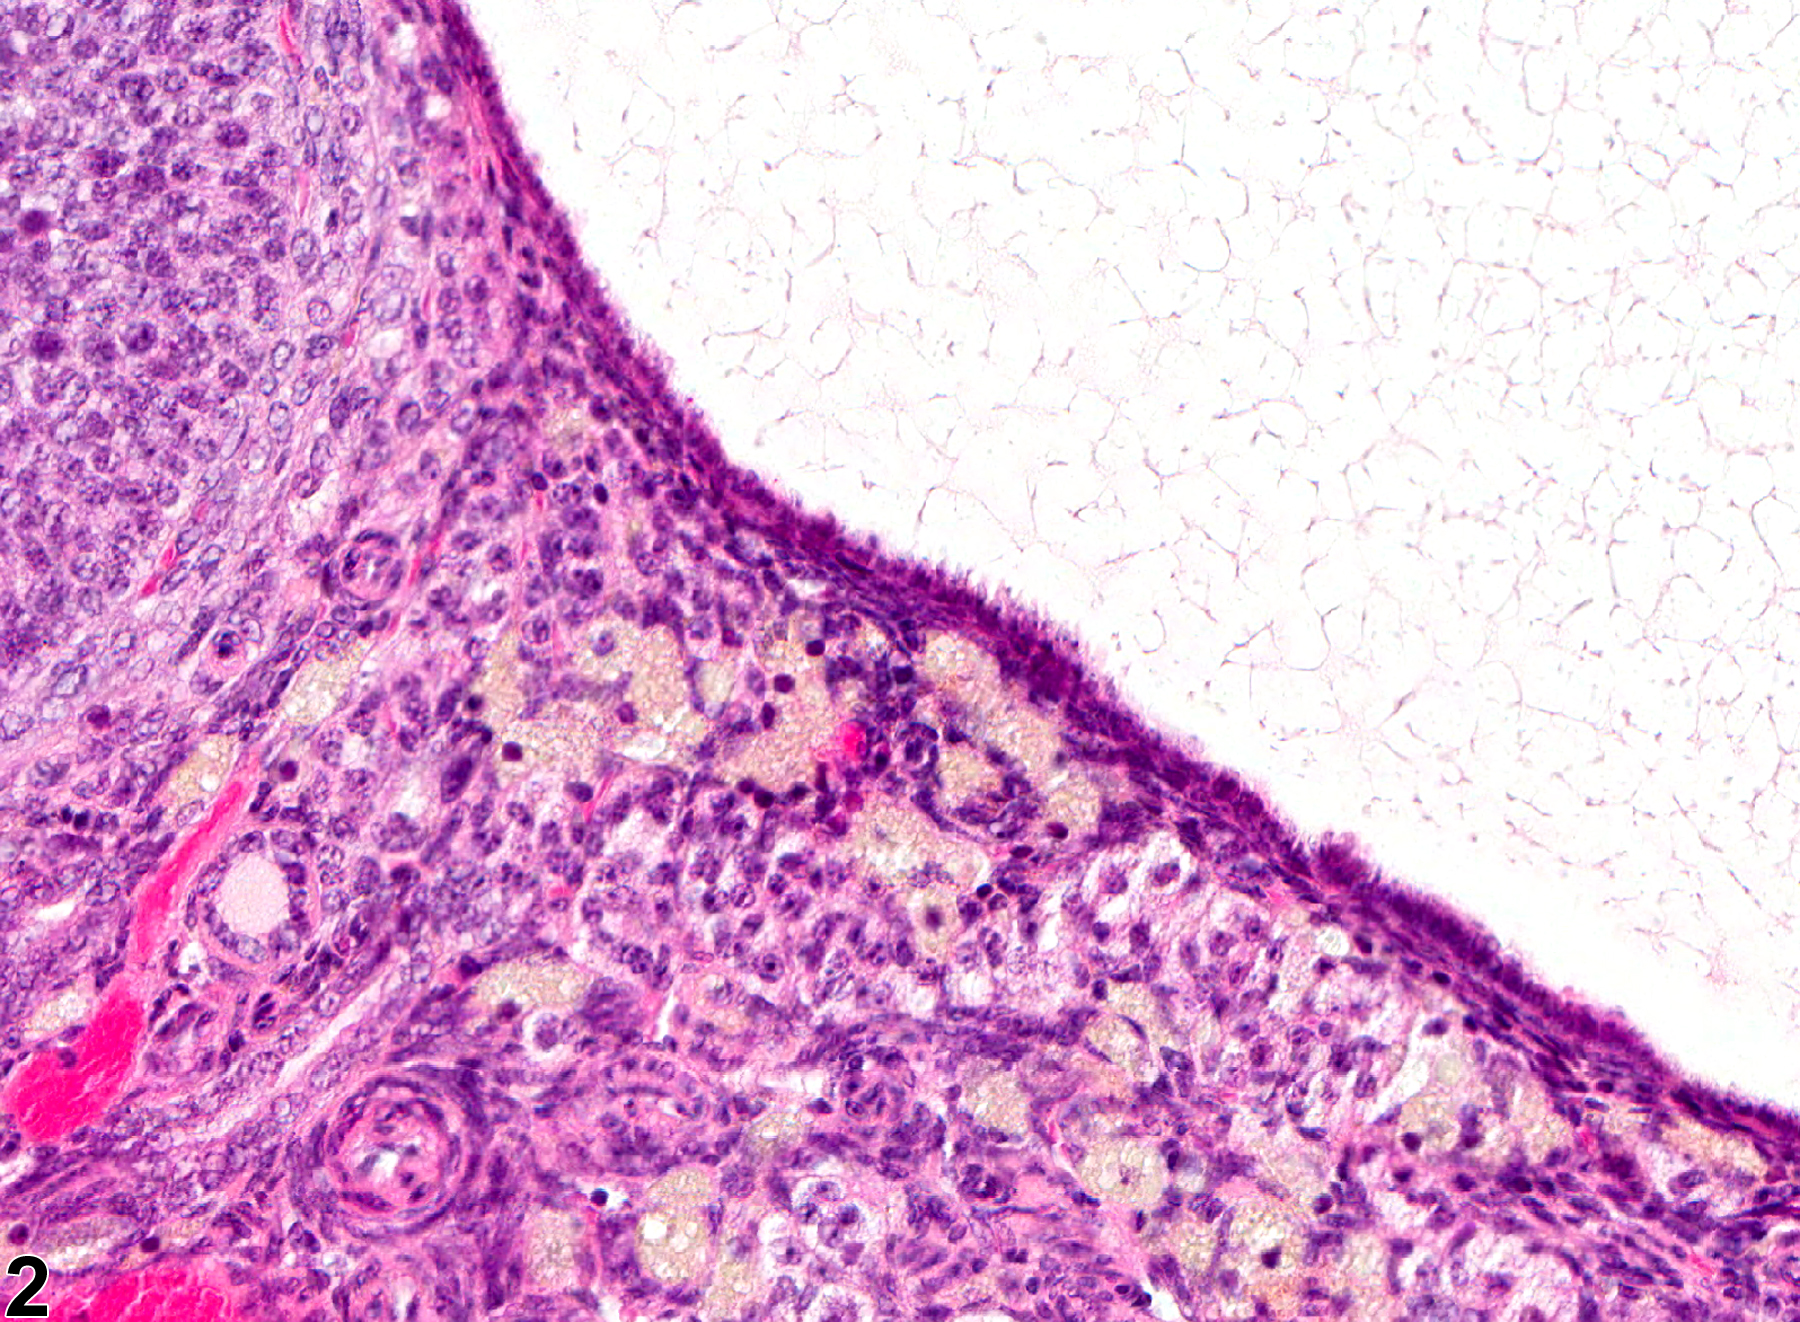 Image of follicular cyst in the ovary from a female B6C3F1 mouse in a chronic study